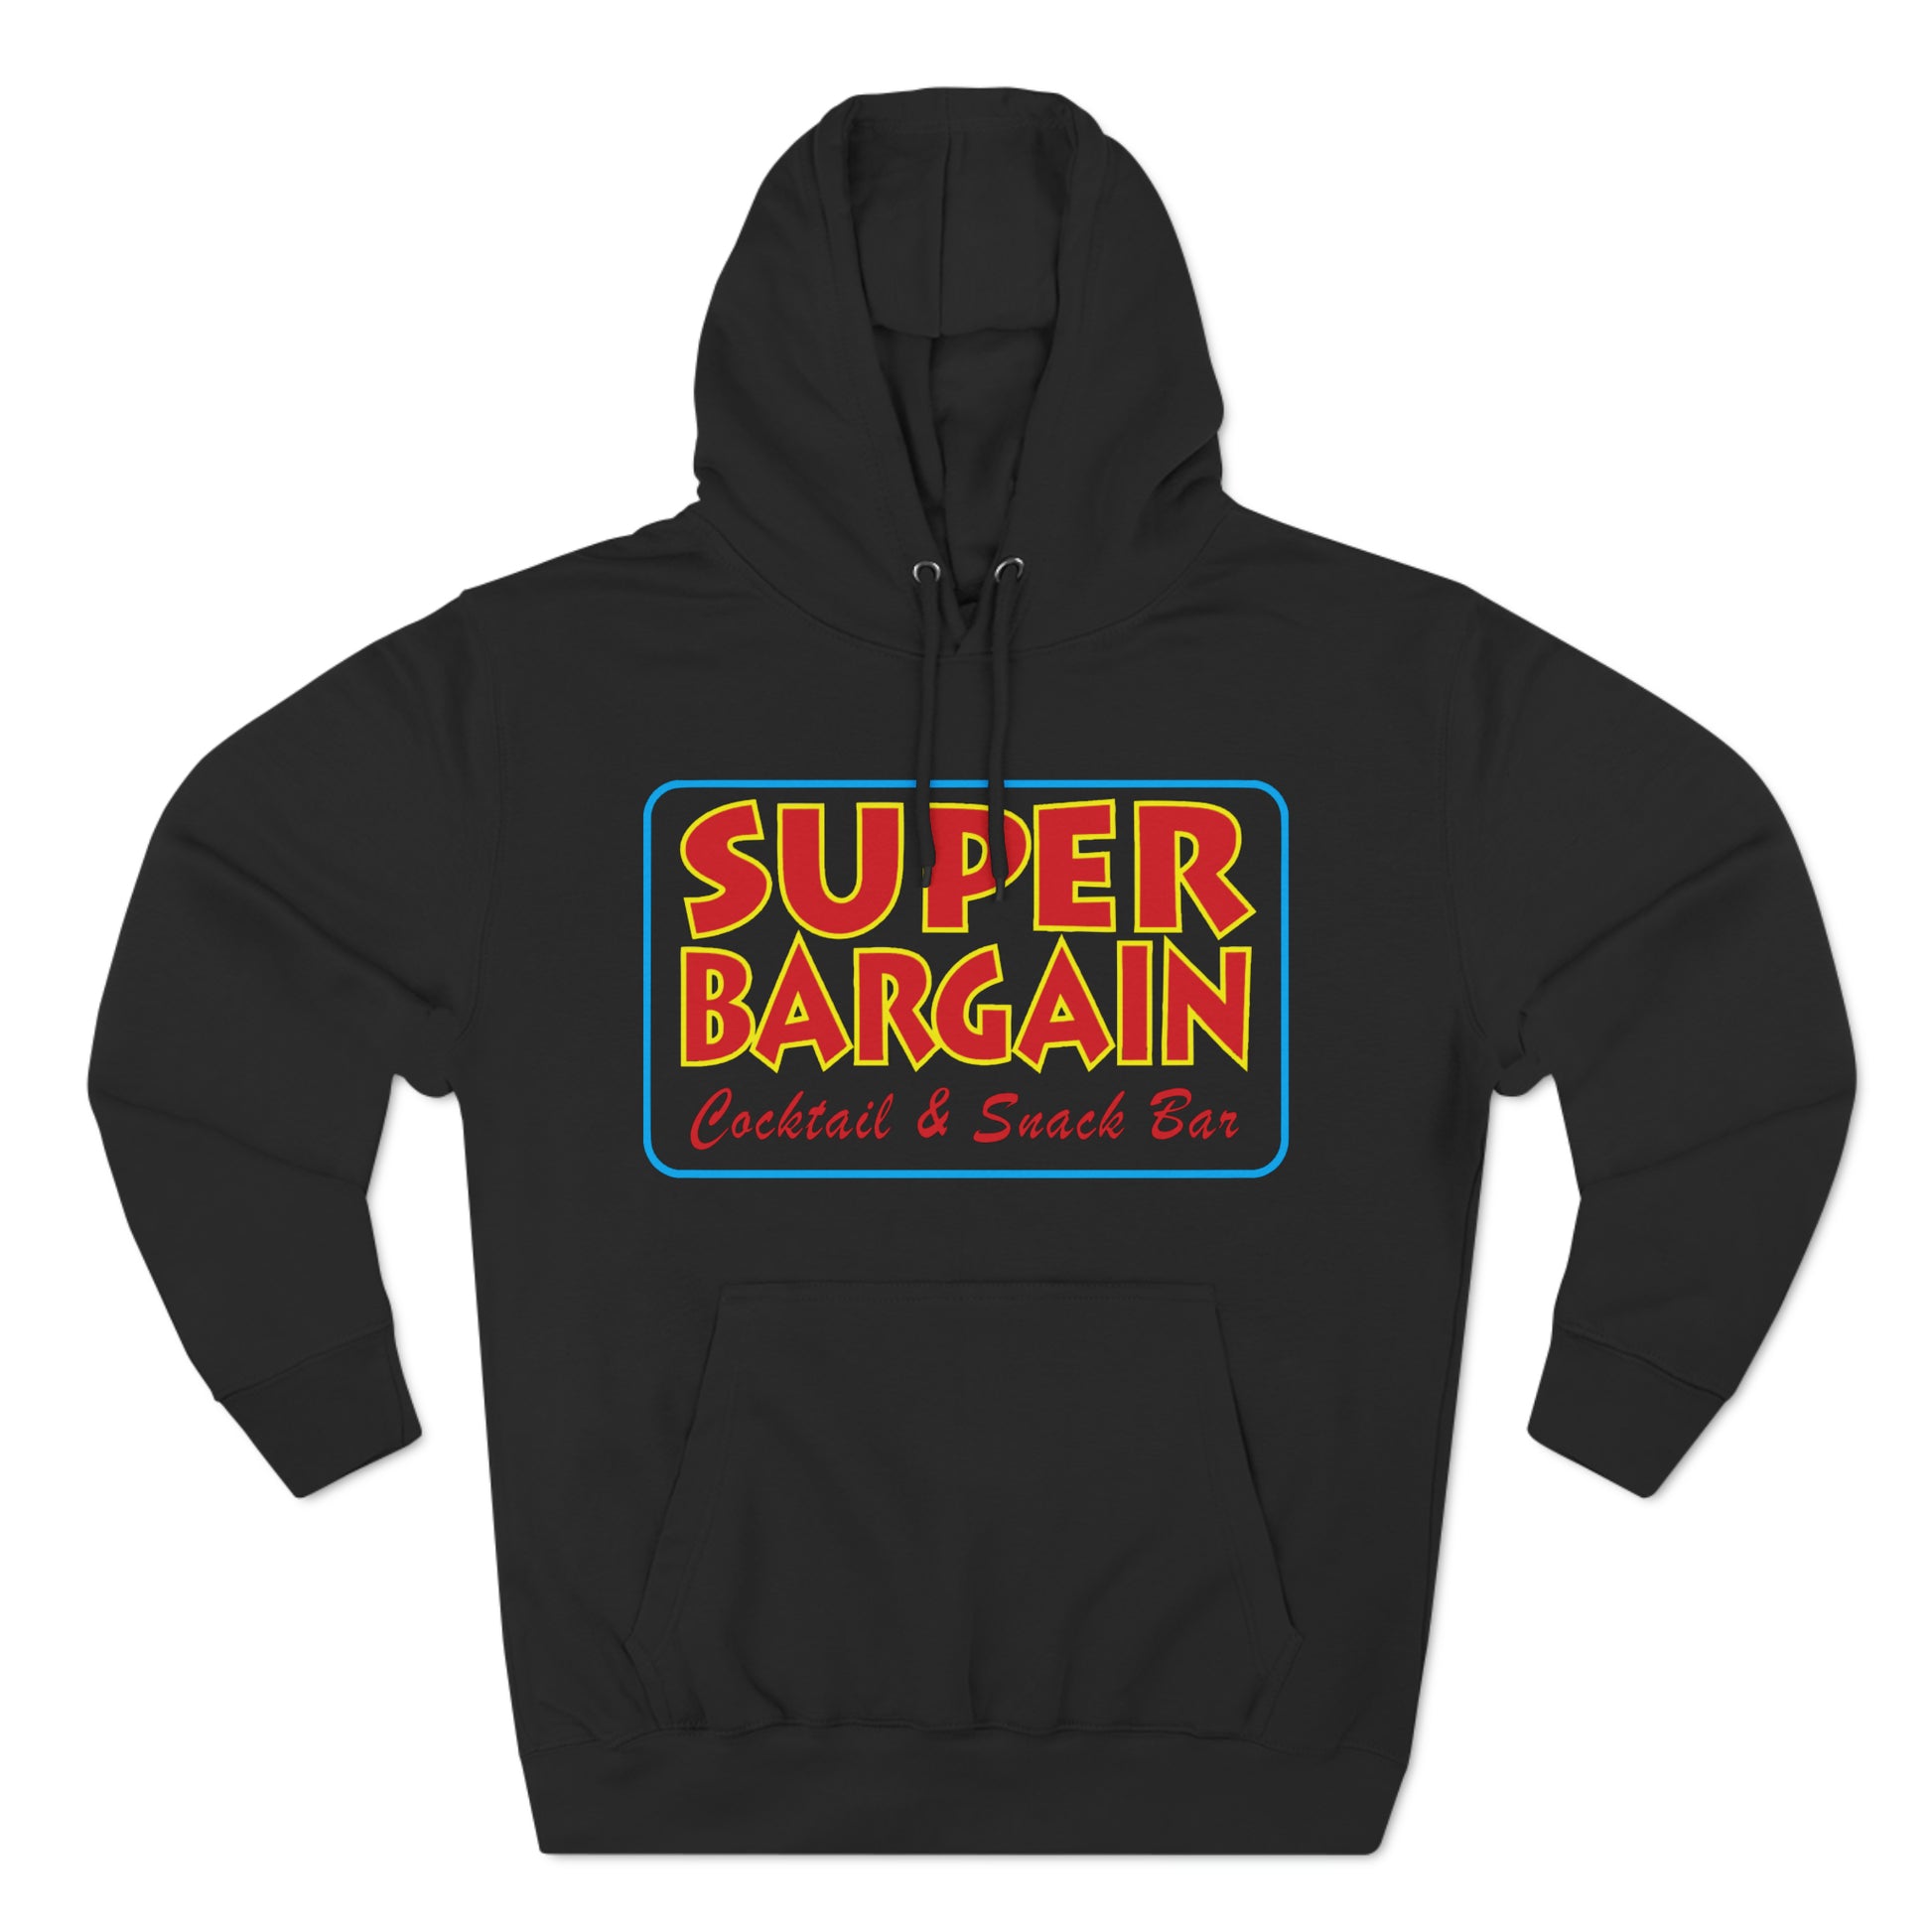 Printify's Unisex Premium Pullover Hoodie with a colorful graphic that reads "SUPER BARGAIN Cabbagetown Cocktail & Snack Bar" on the front. The hoodie features a front pocket and drawstrings.